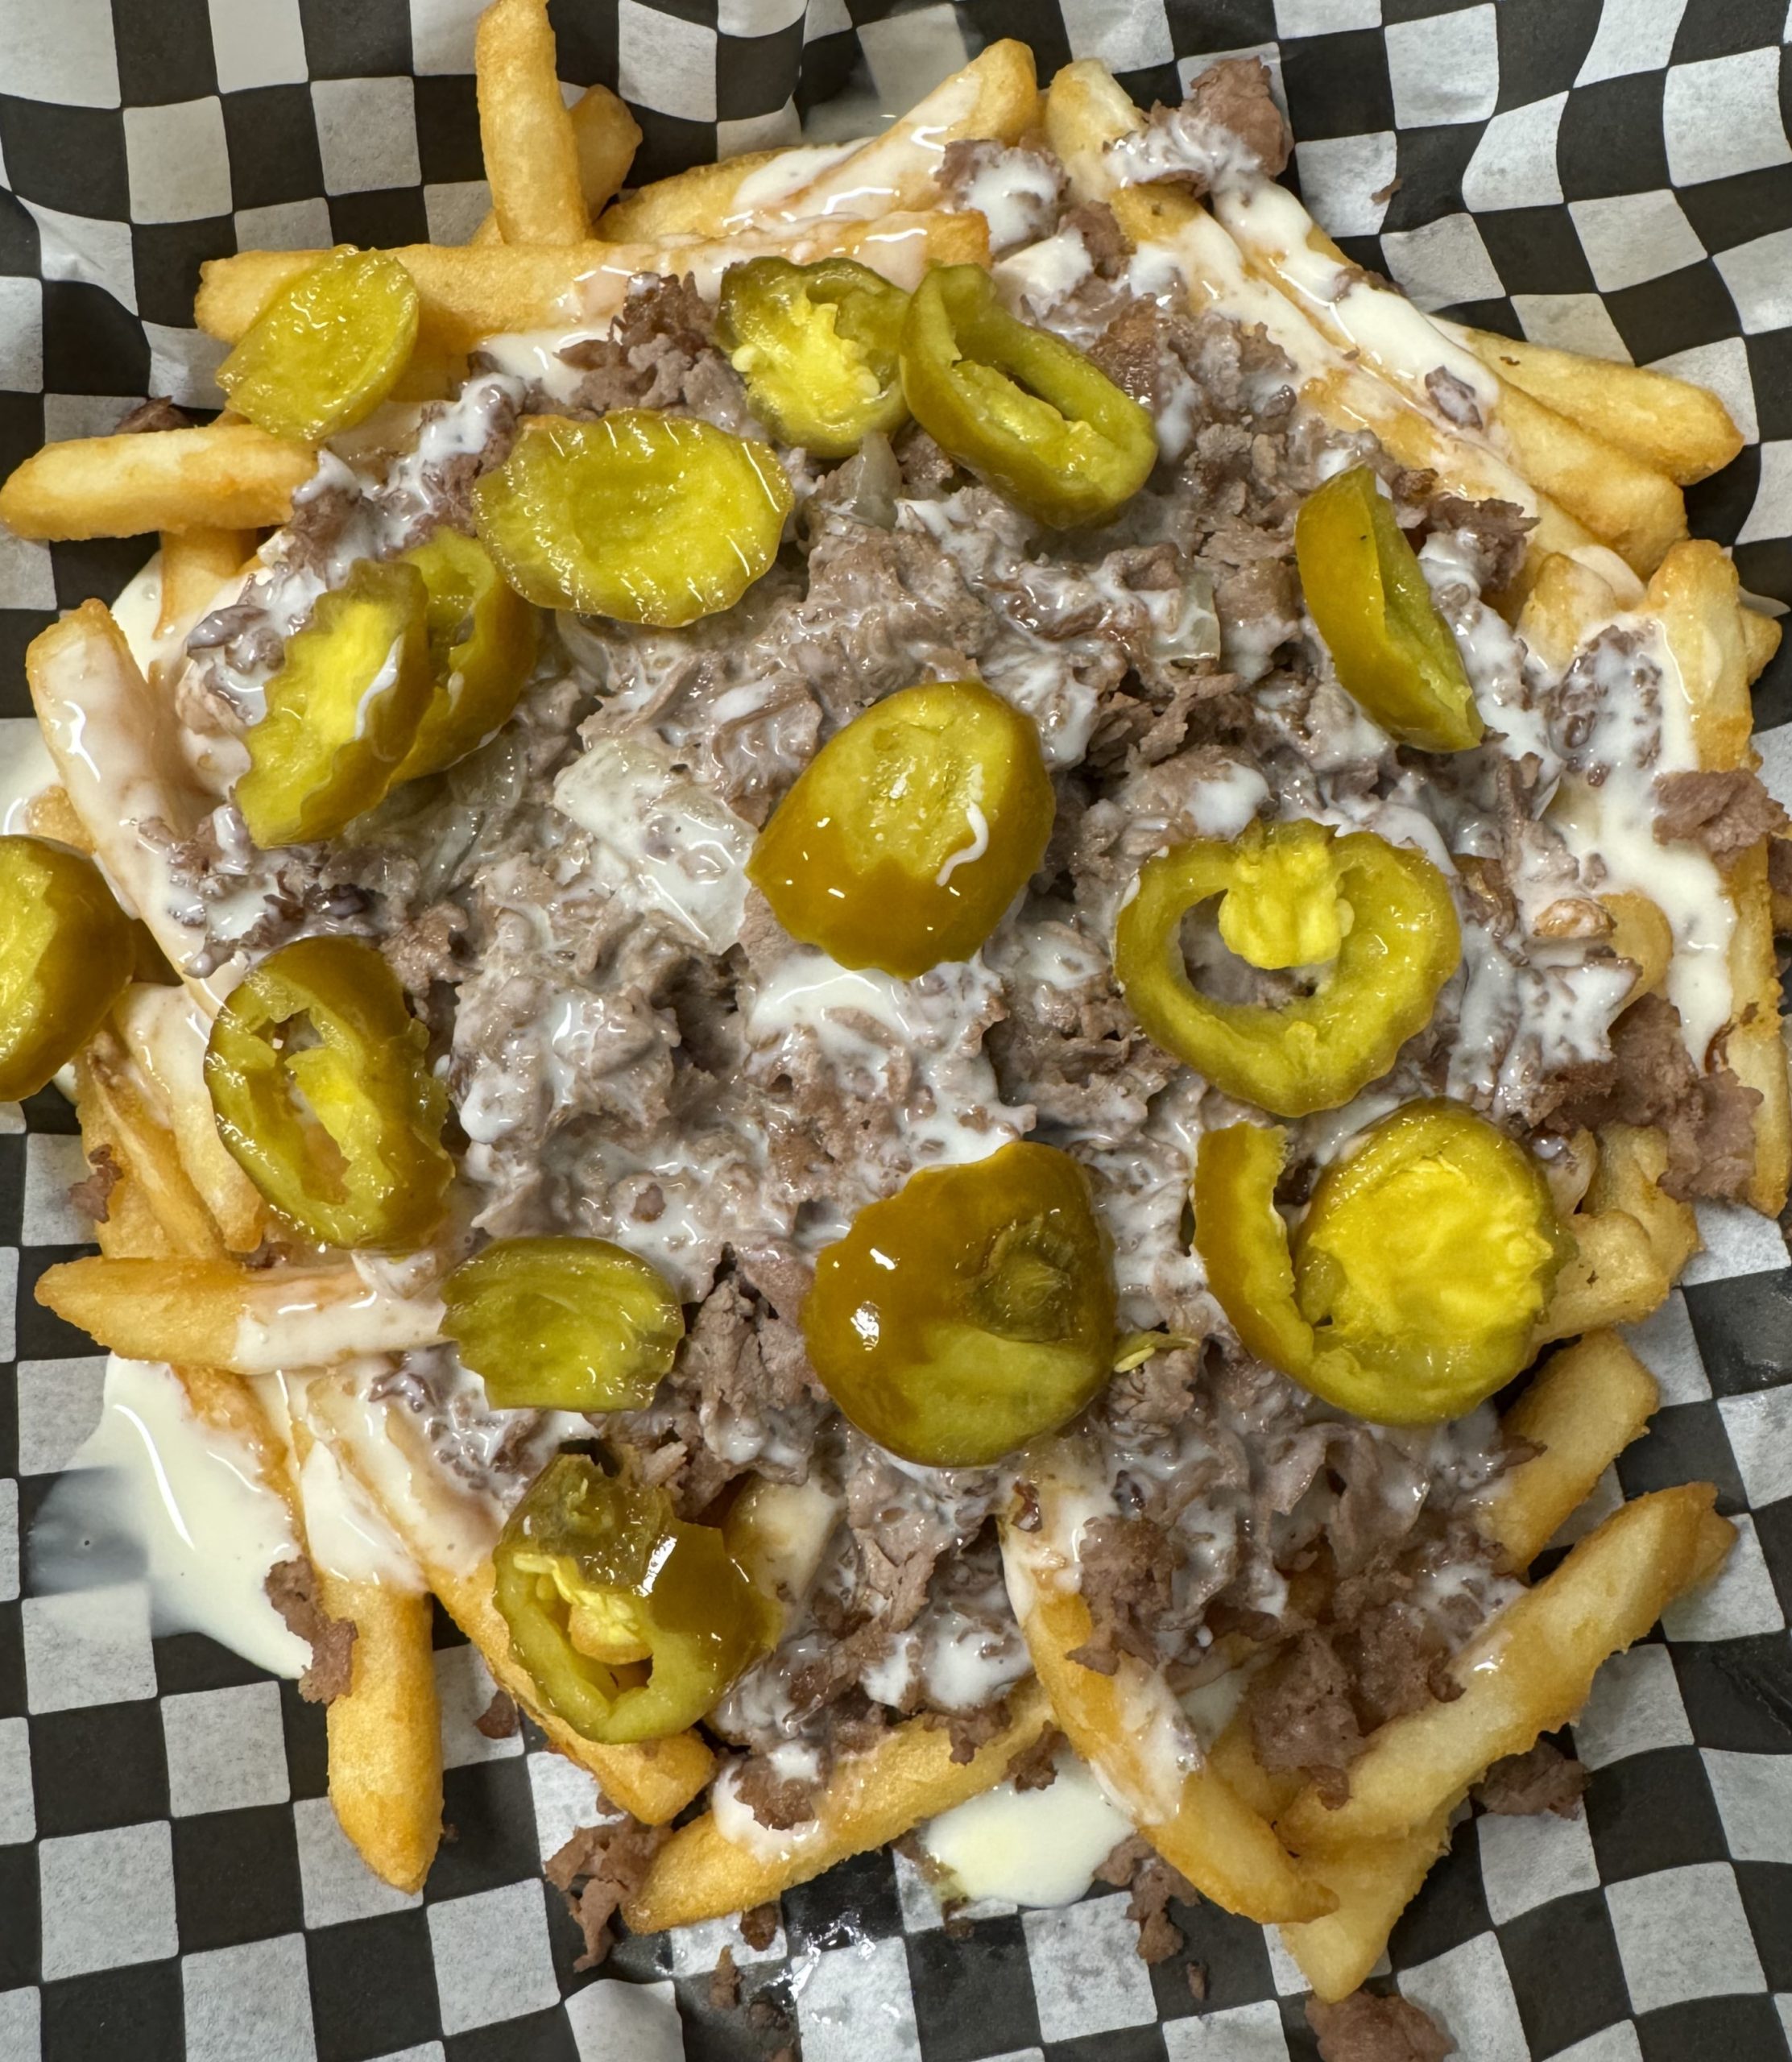 A plate of french fries with meat and pickles.